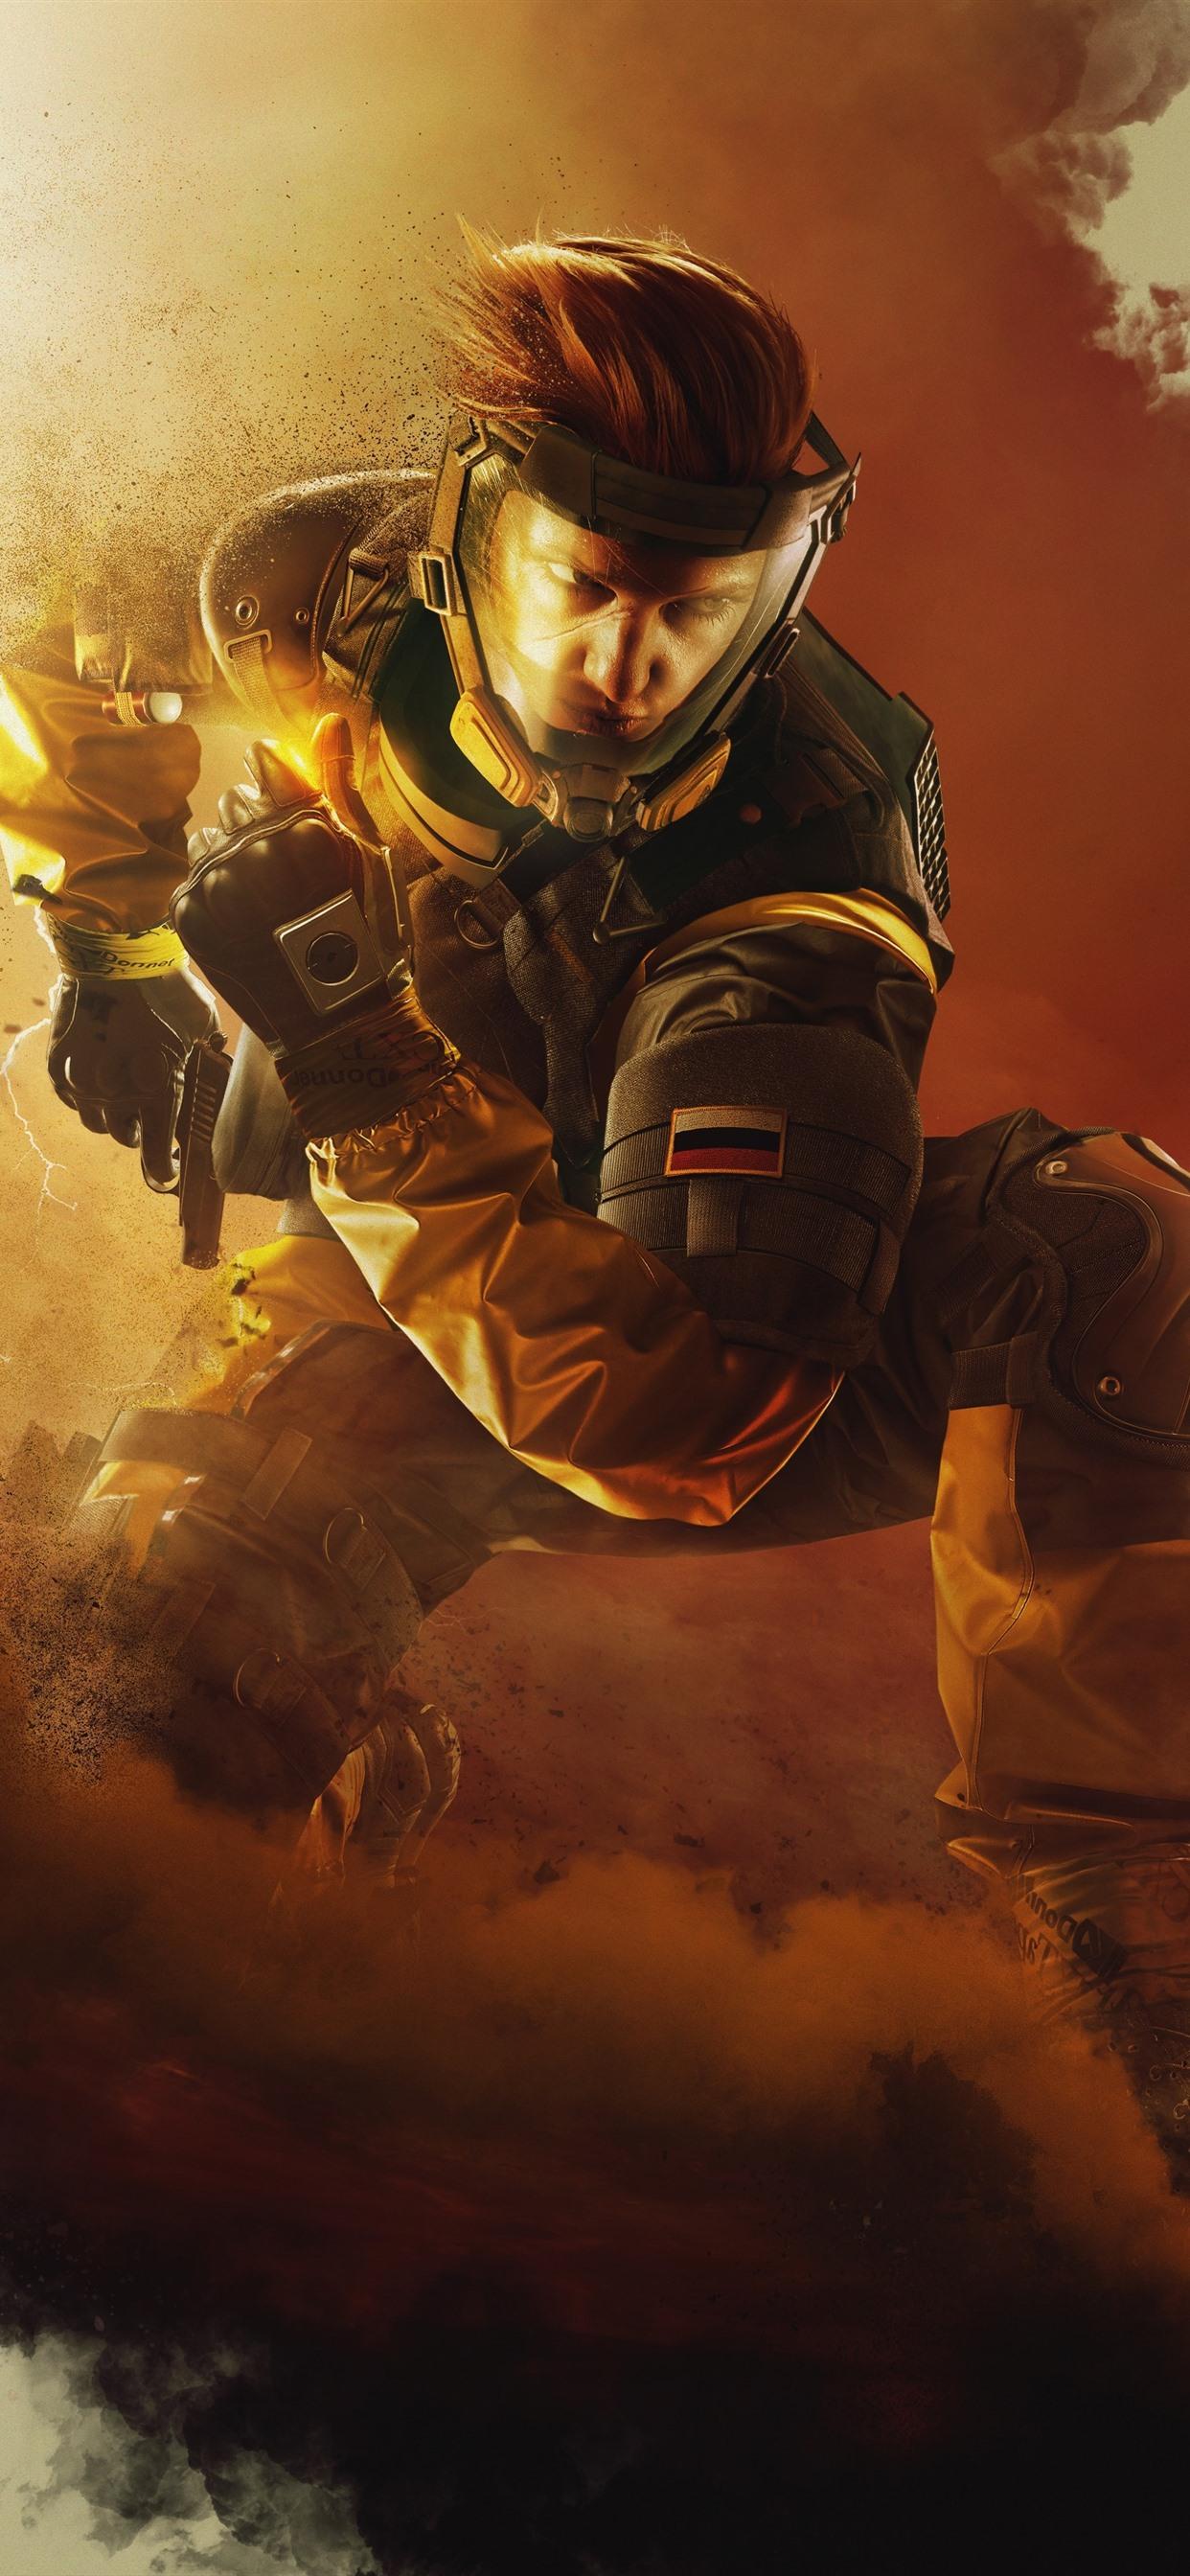 Rainbow 6 Siege Iphone Wallpapers Wallpaper Cave